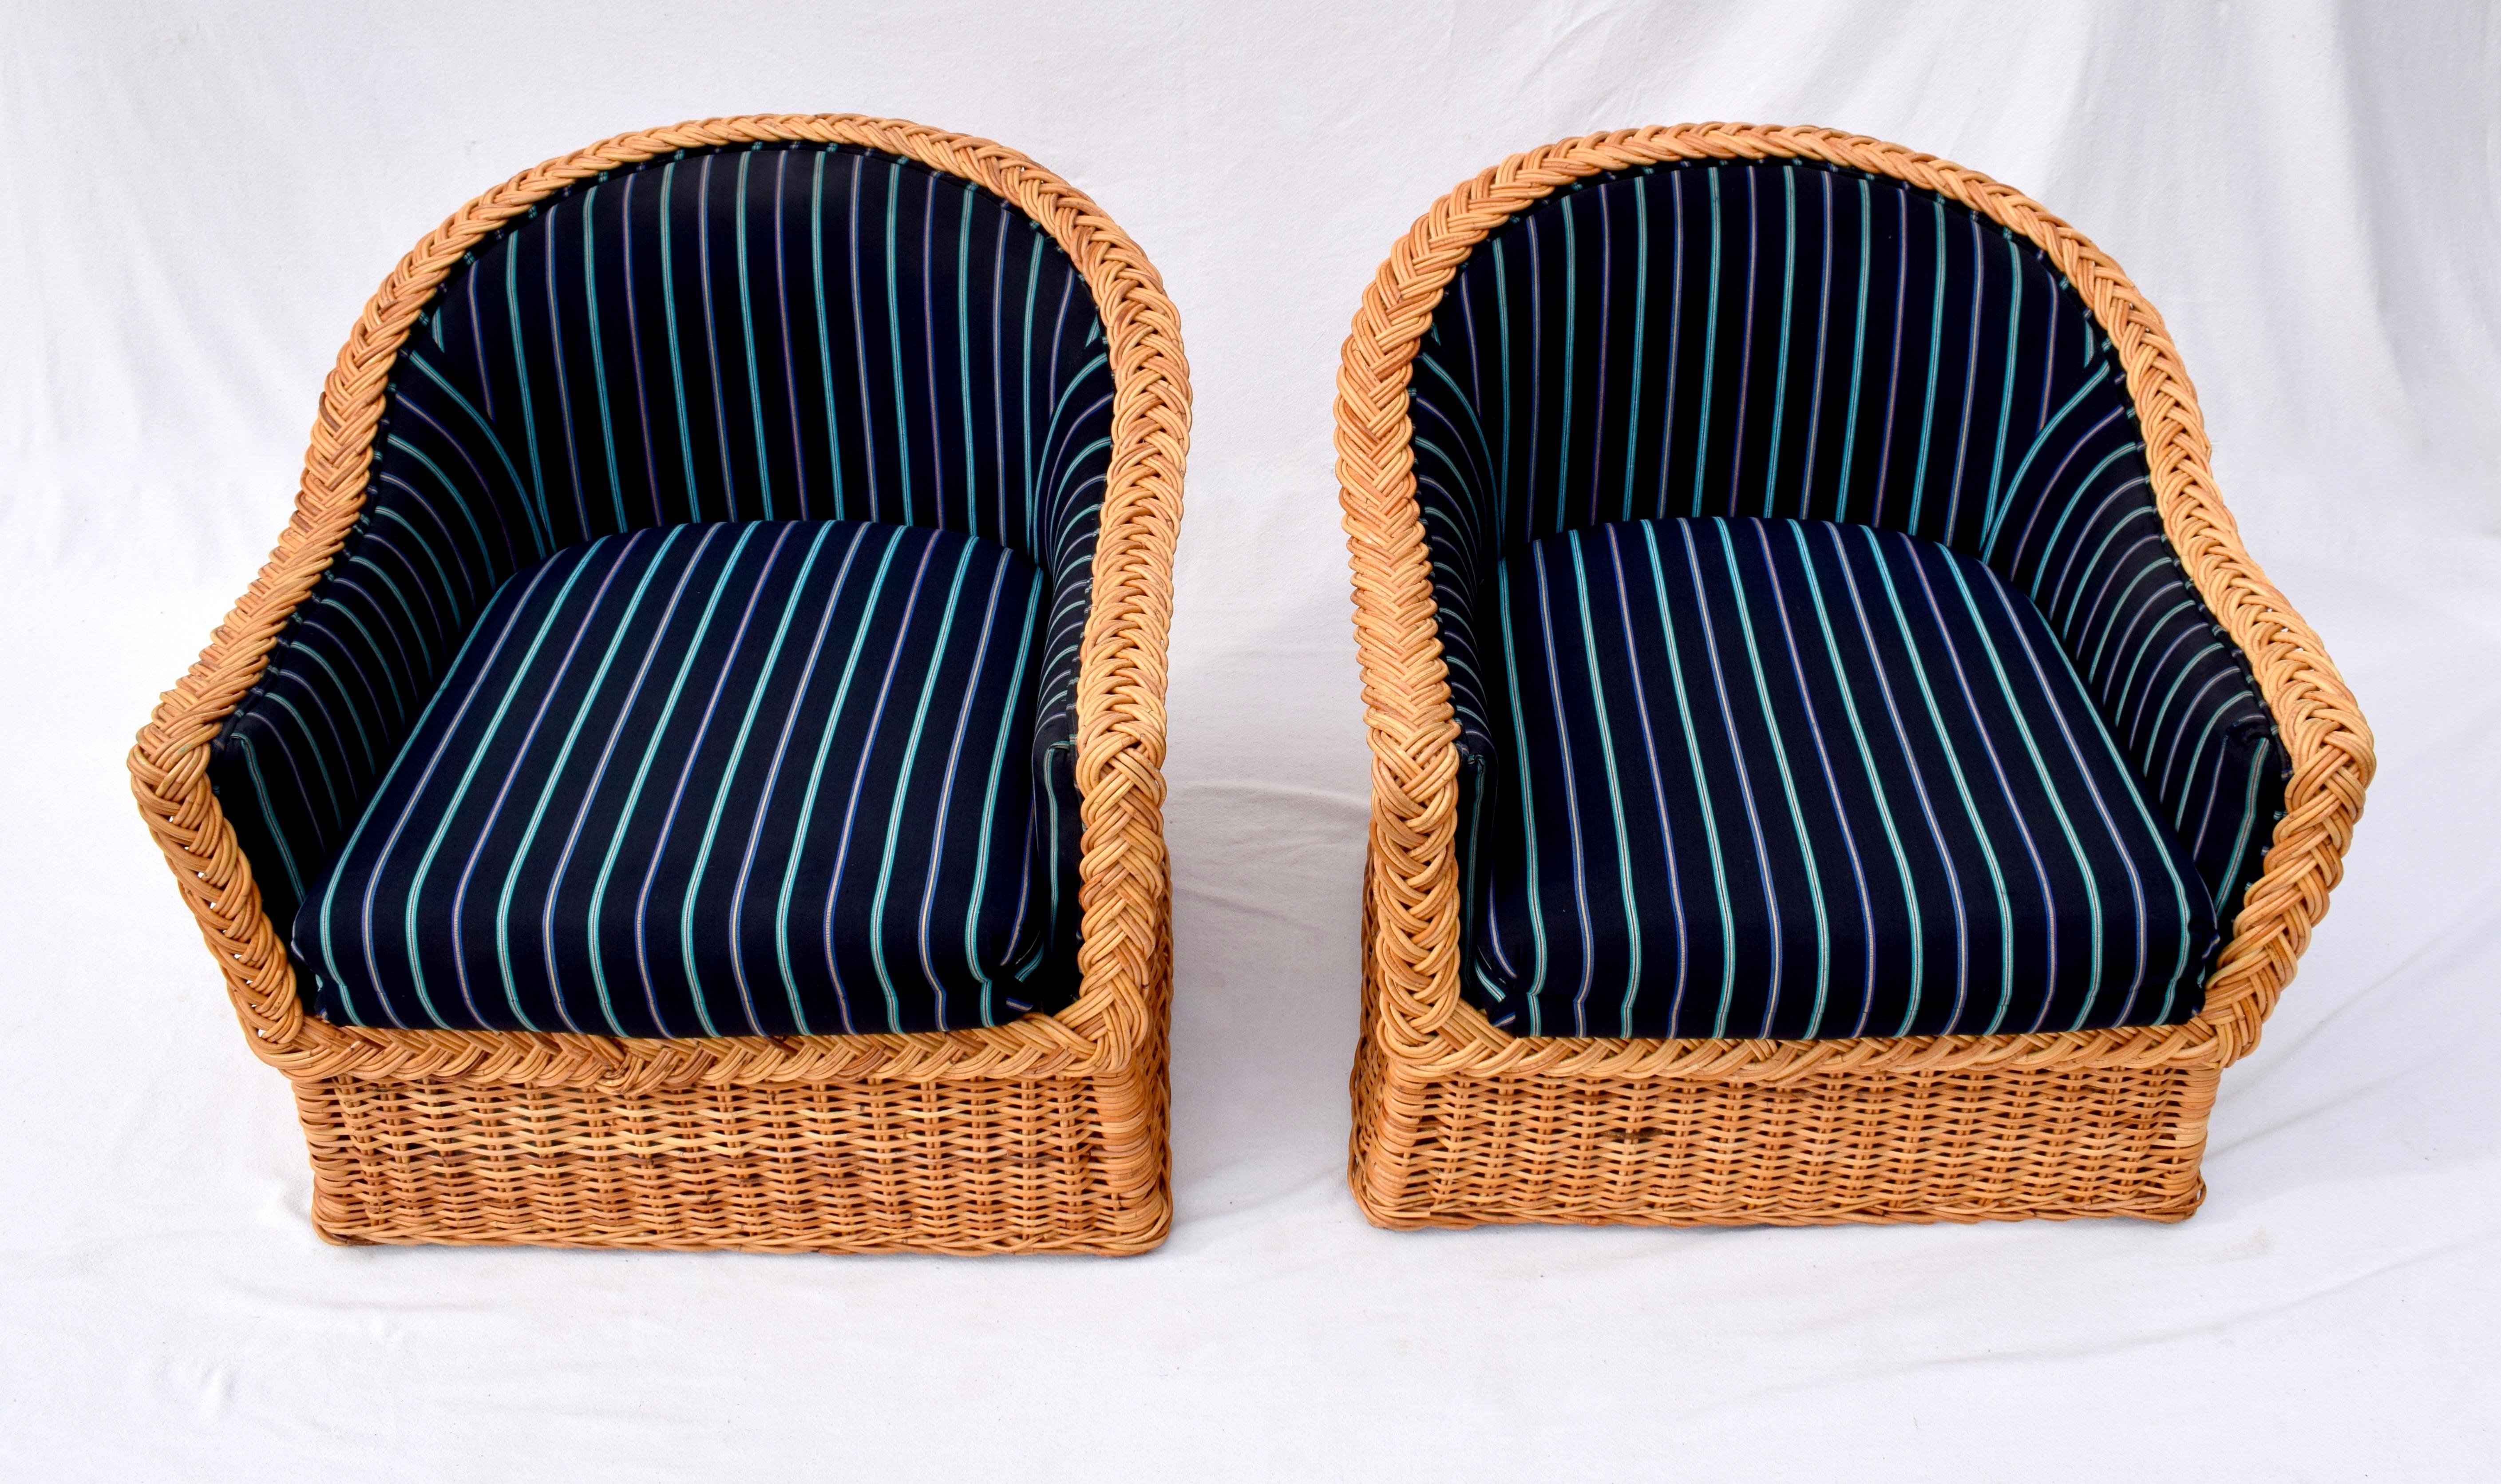 A large pair of vintage Wicker Works braided wicker club chairs from the 1980s reupholstered in the late 1990's. These comfortable chairs are in clean well maintained condition with years of use left. Matching back cushions are included ( not